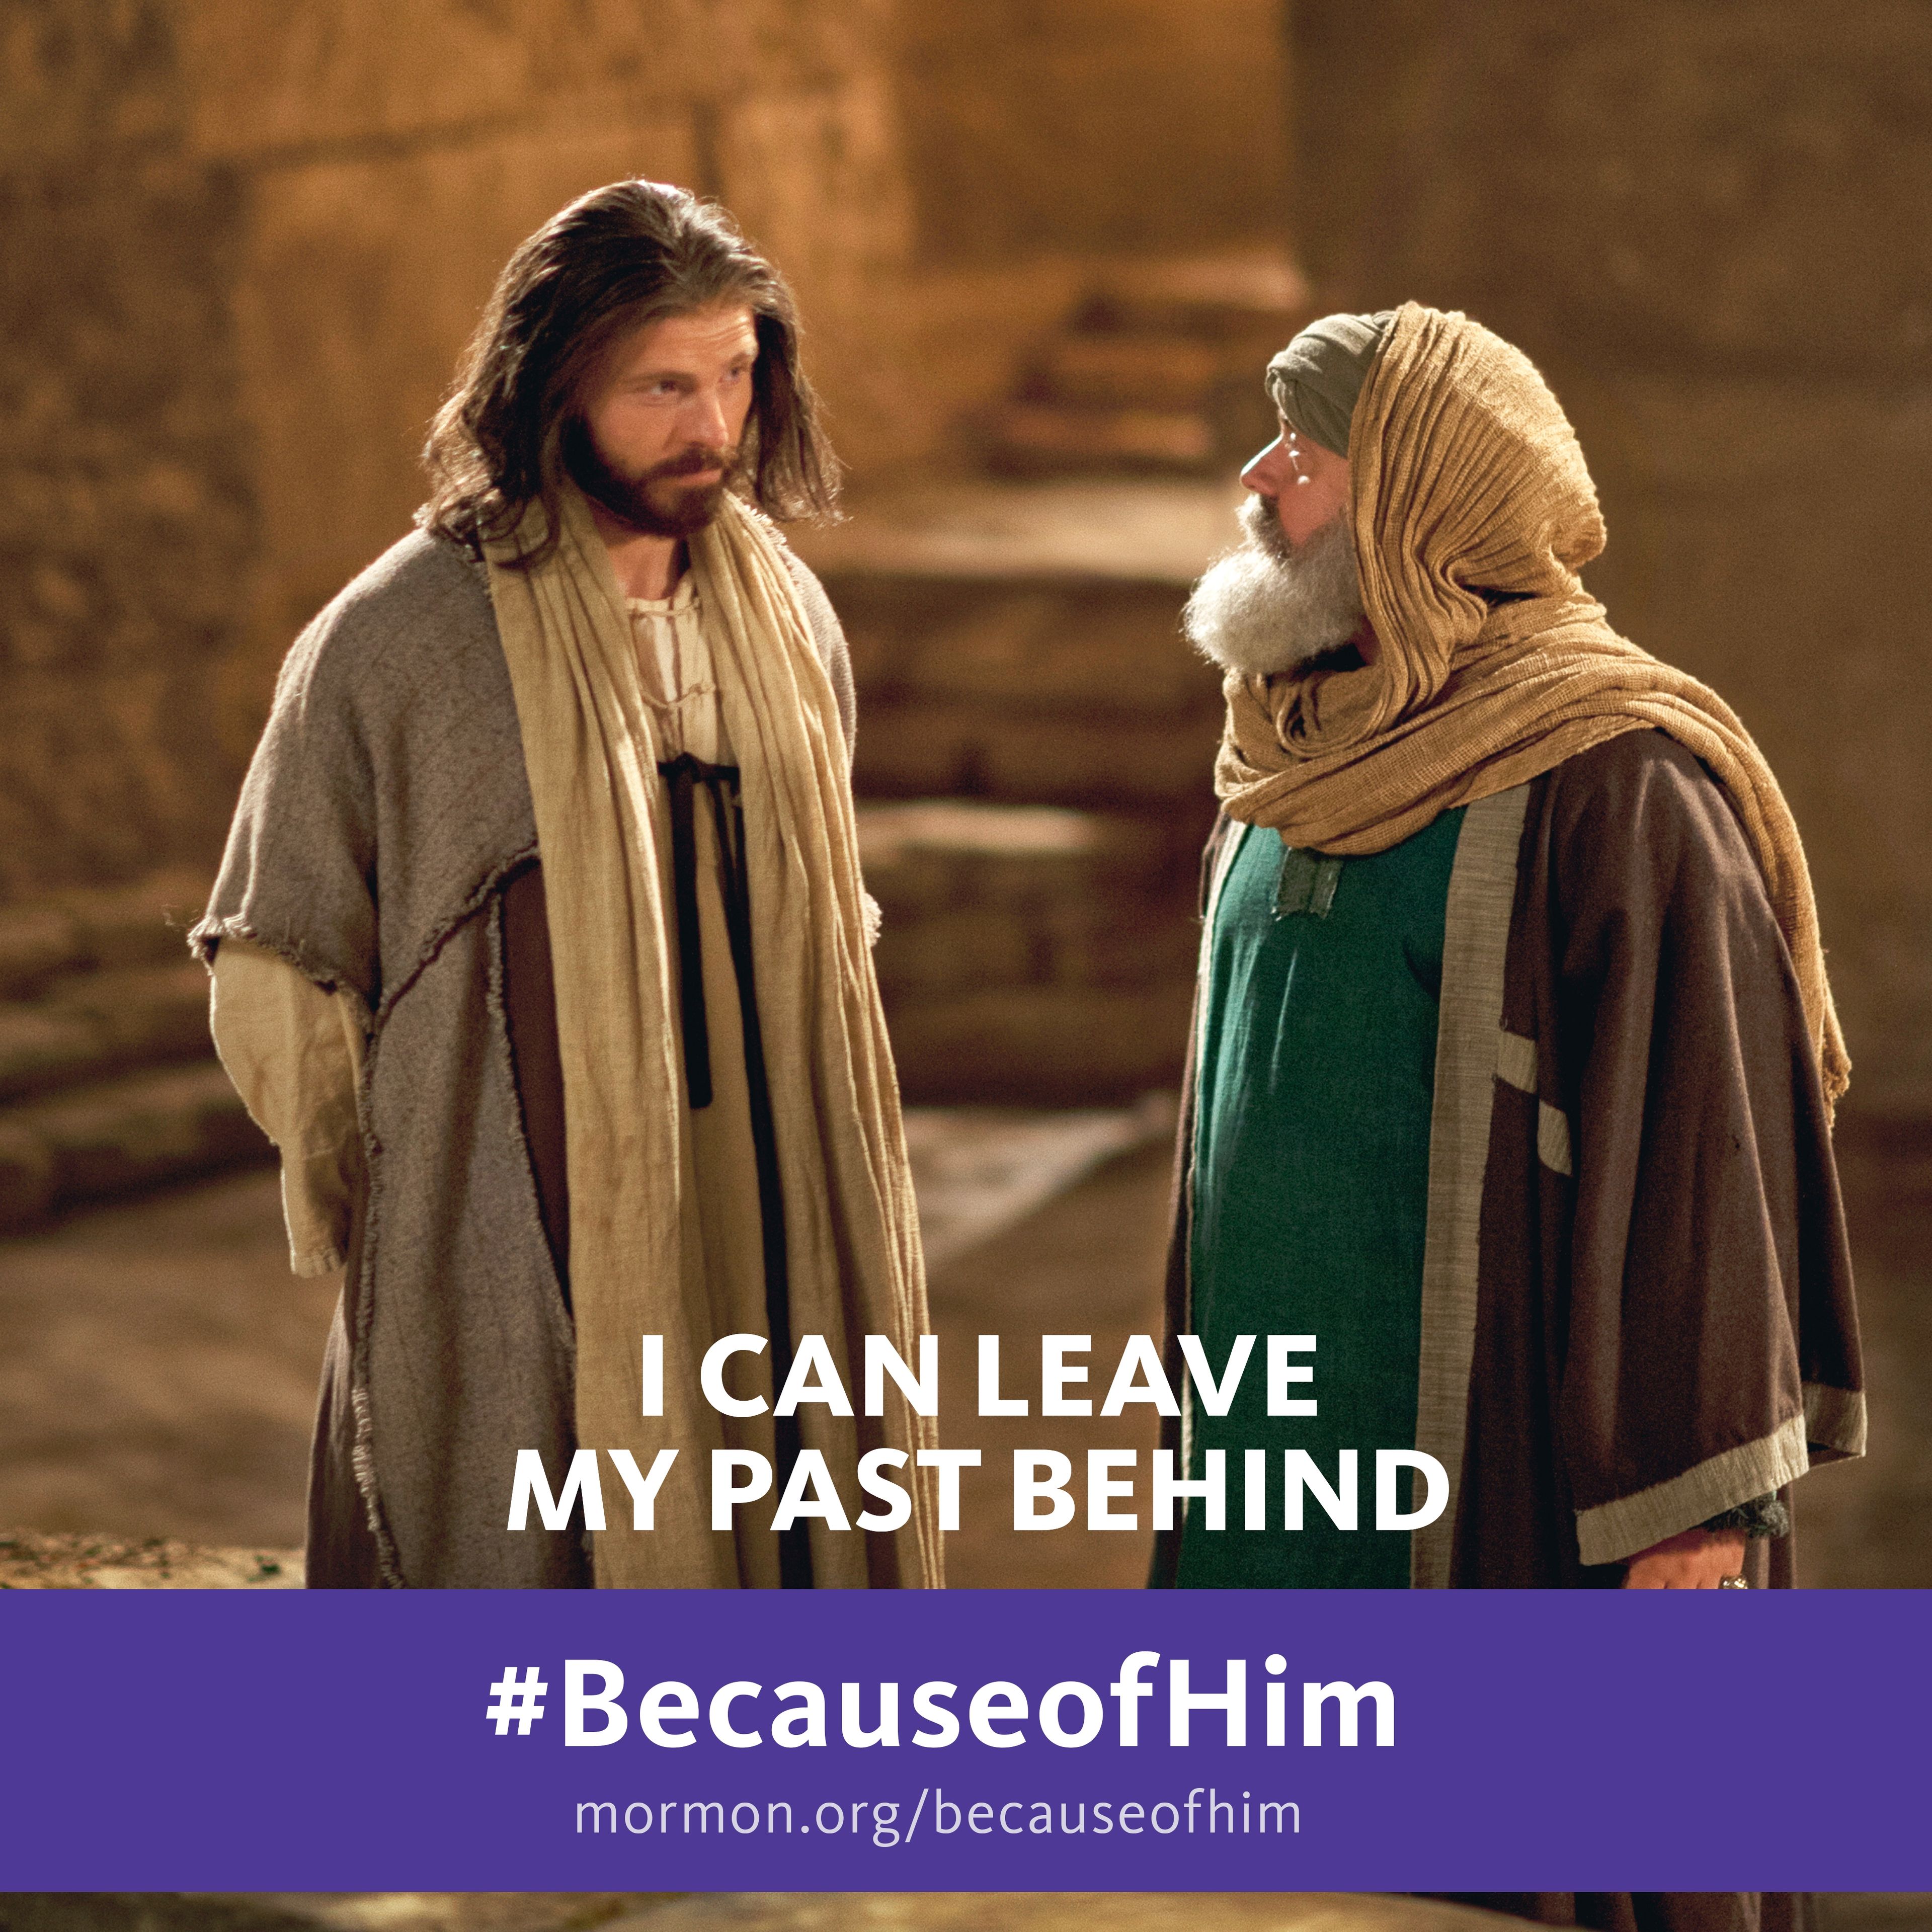 I can leave my past behind. #BecauseofHim, mormon.org/becauseofhim © undefined ipCode 1.